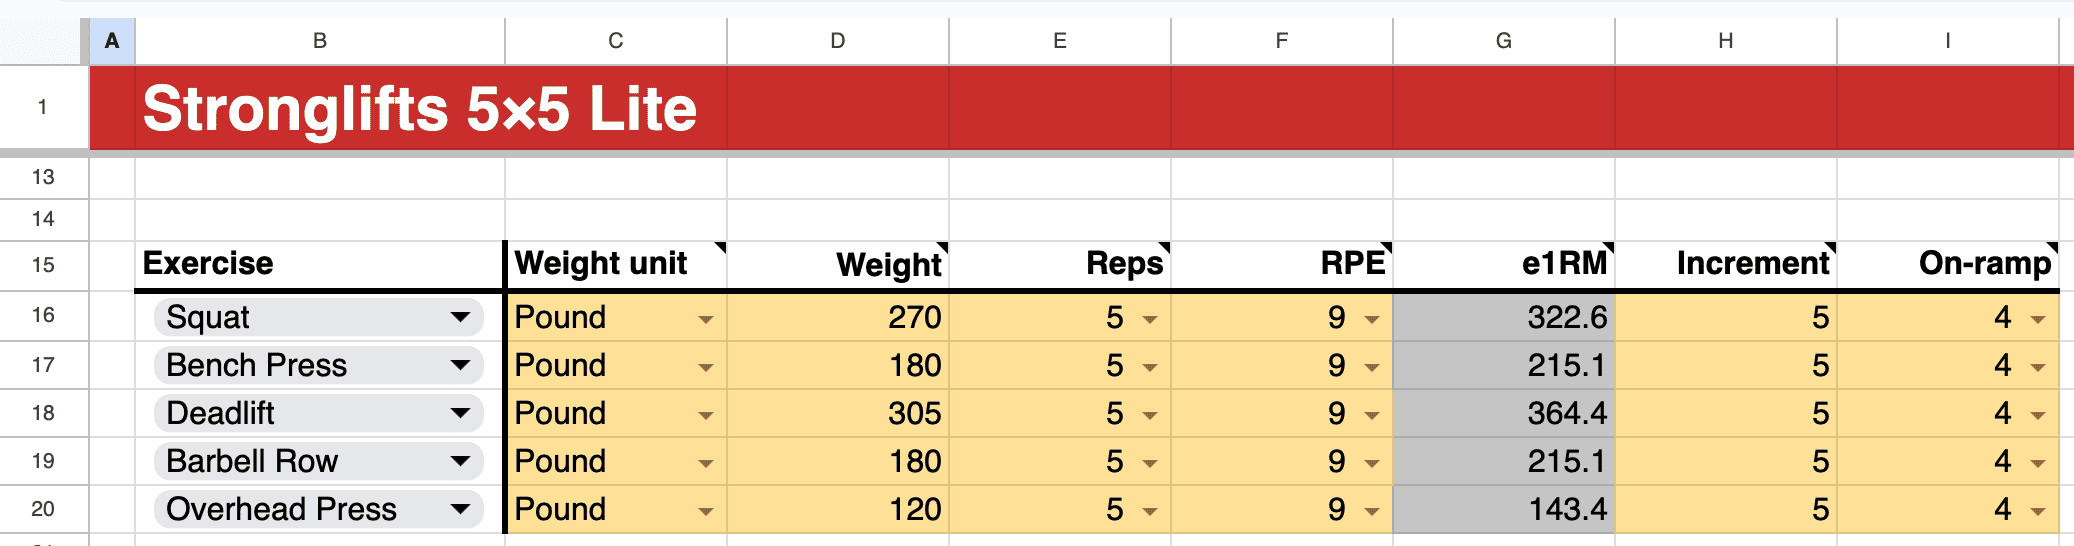 On-ramp settings Stronglifts 5x5 Lite spreadsheet